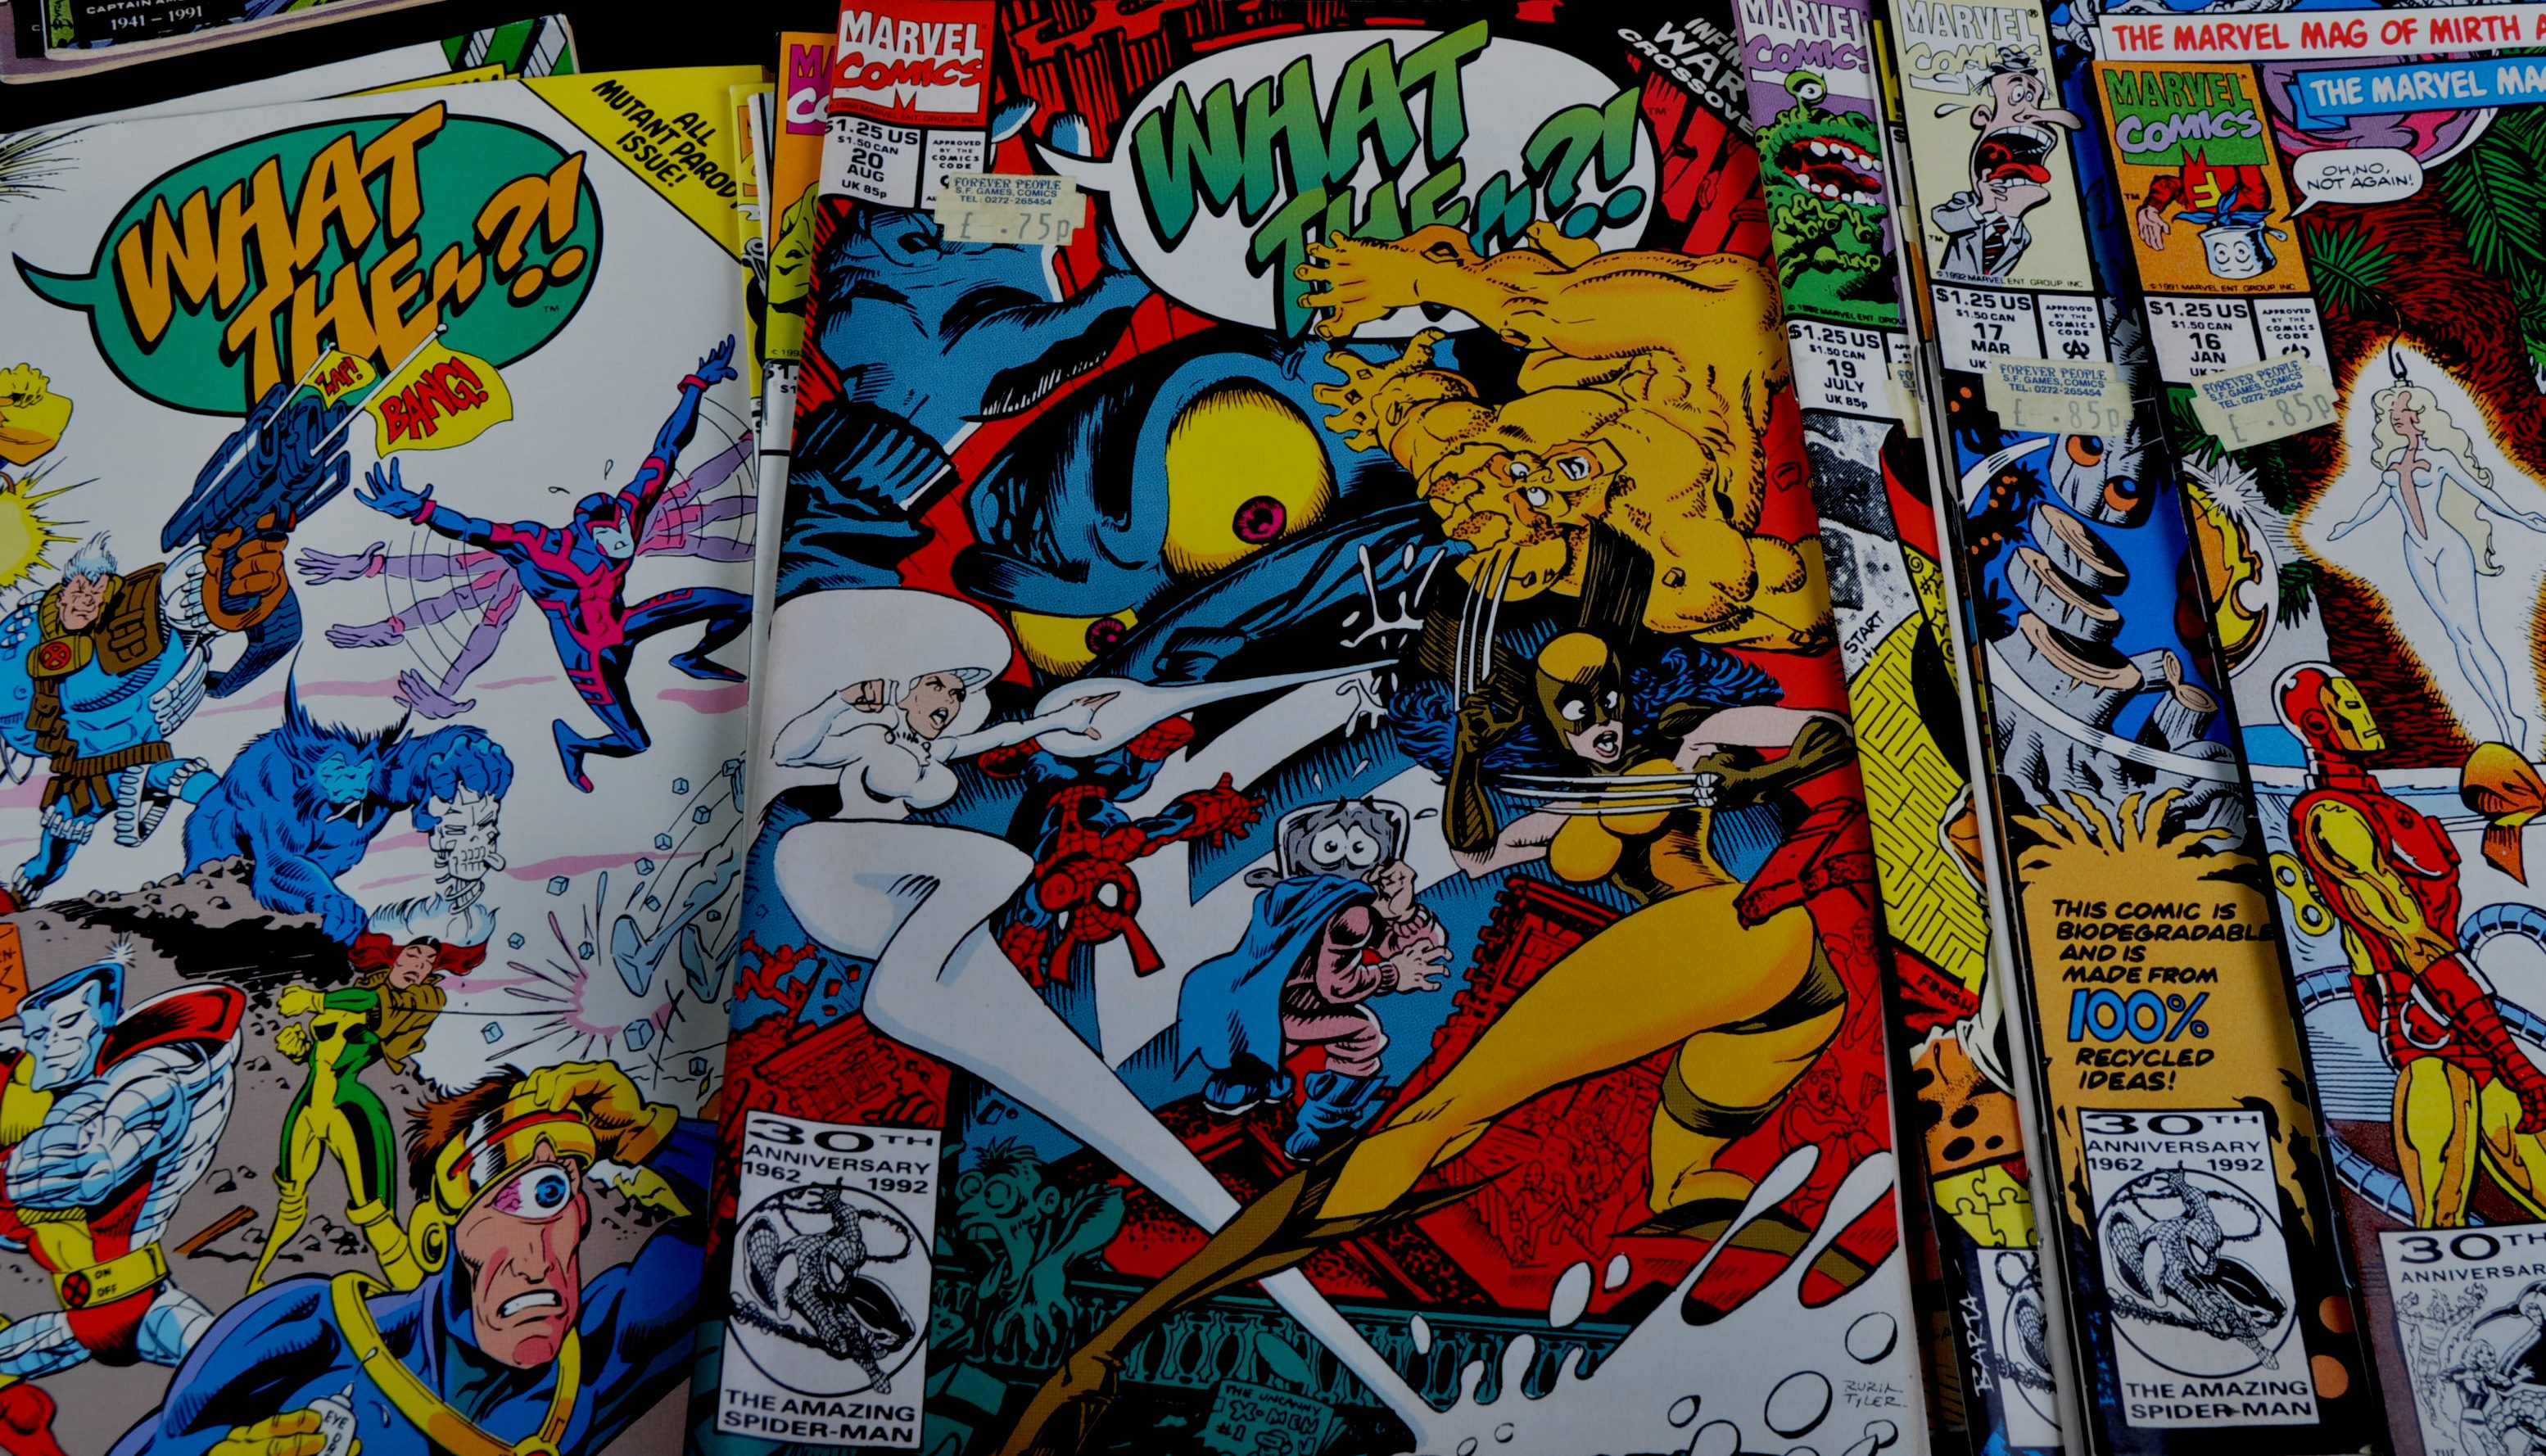 MARVEL COMICS - WHAT THE ..?! - COMPLETE RUN OF COMIC BOOKS - Image 6 of 6